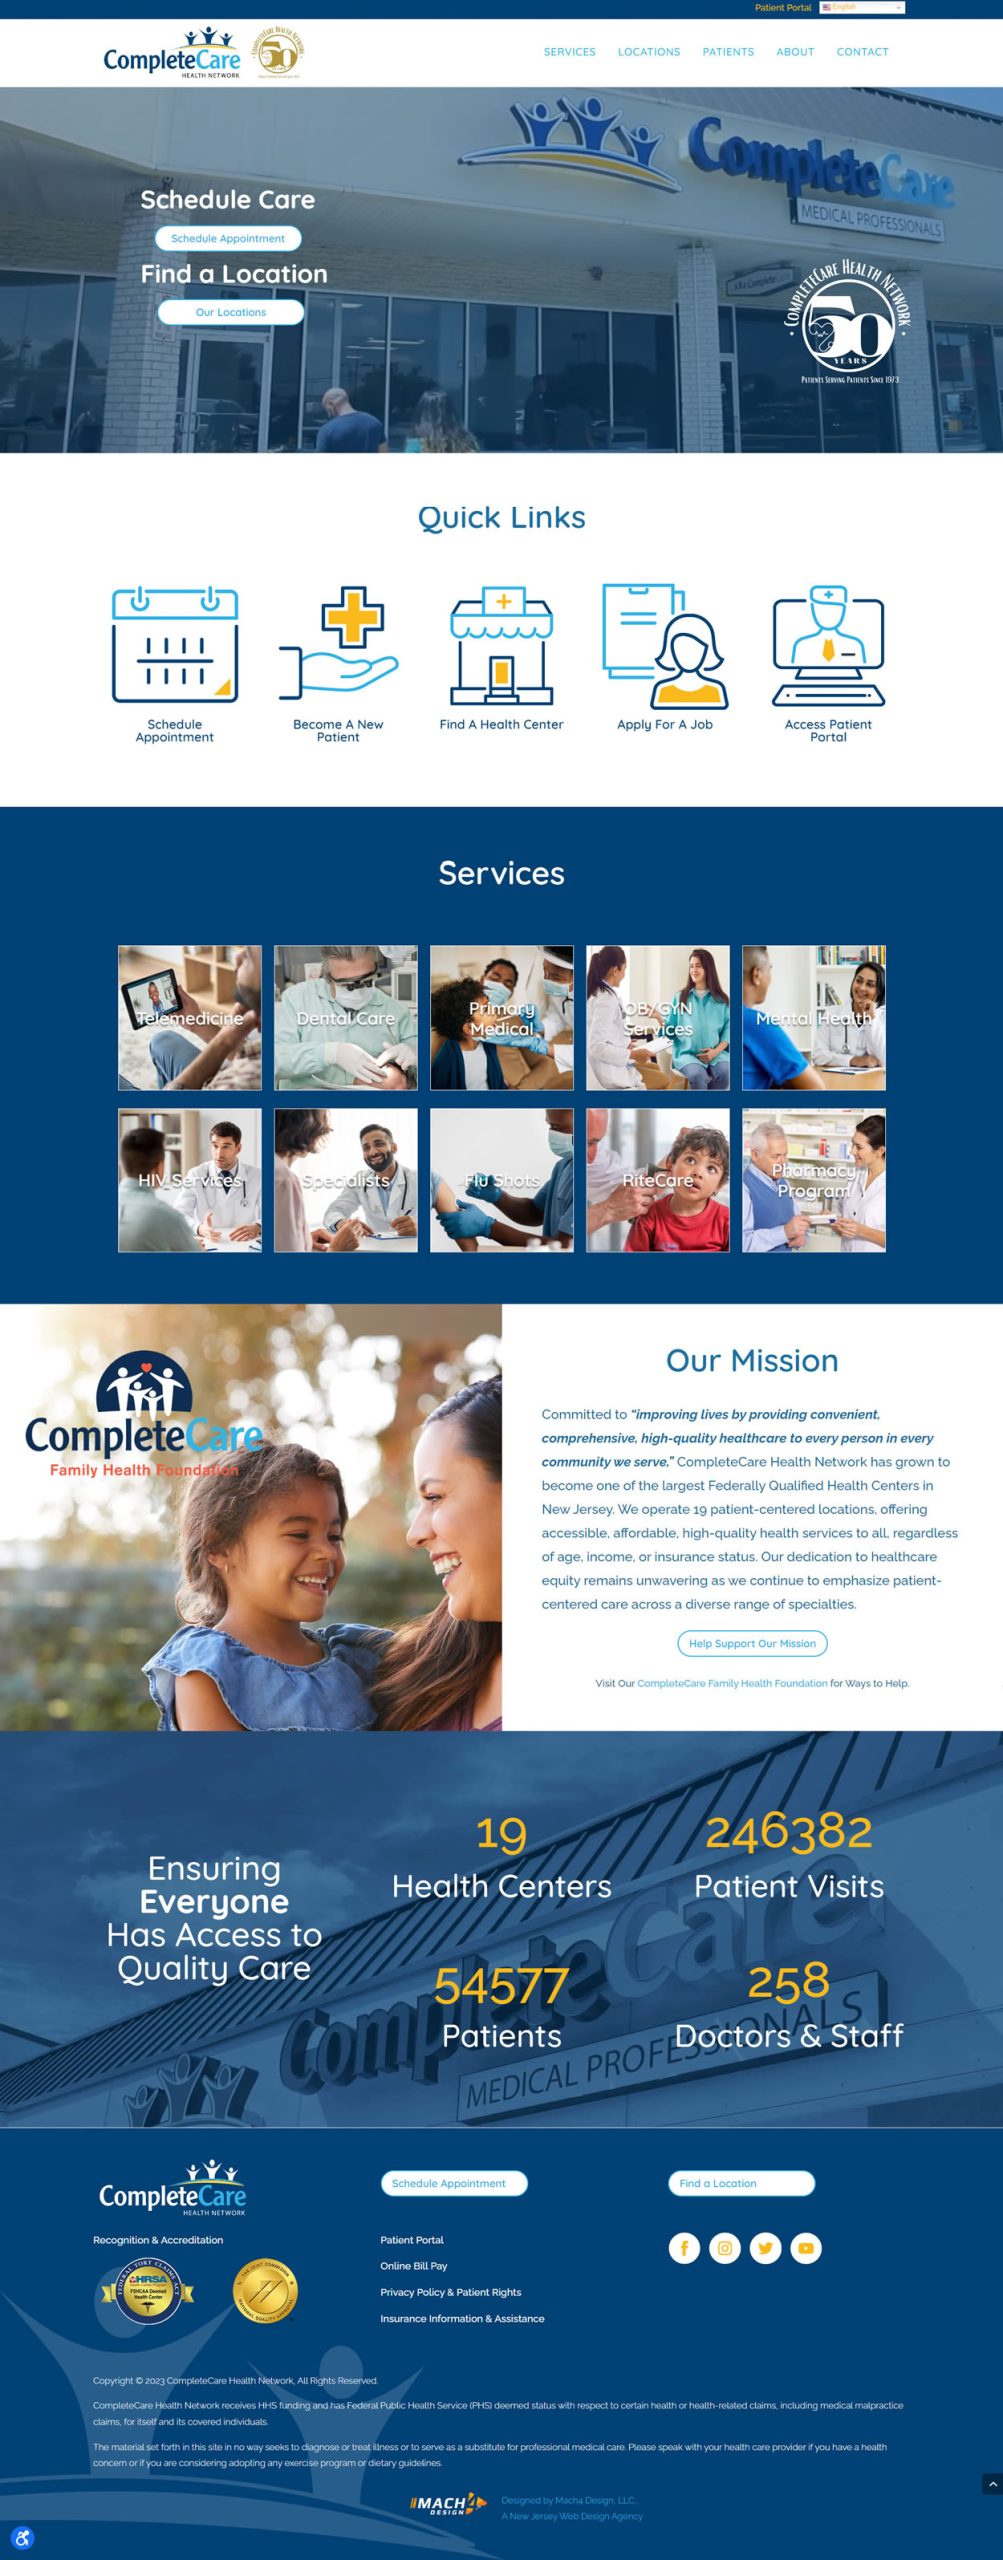 Mach4 Design, LLC, a leading agency specializing in digital marketing and web design, has diligently developed this website on behalf of its client: CompleteCare Health Network.